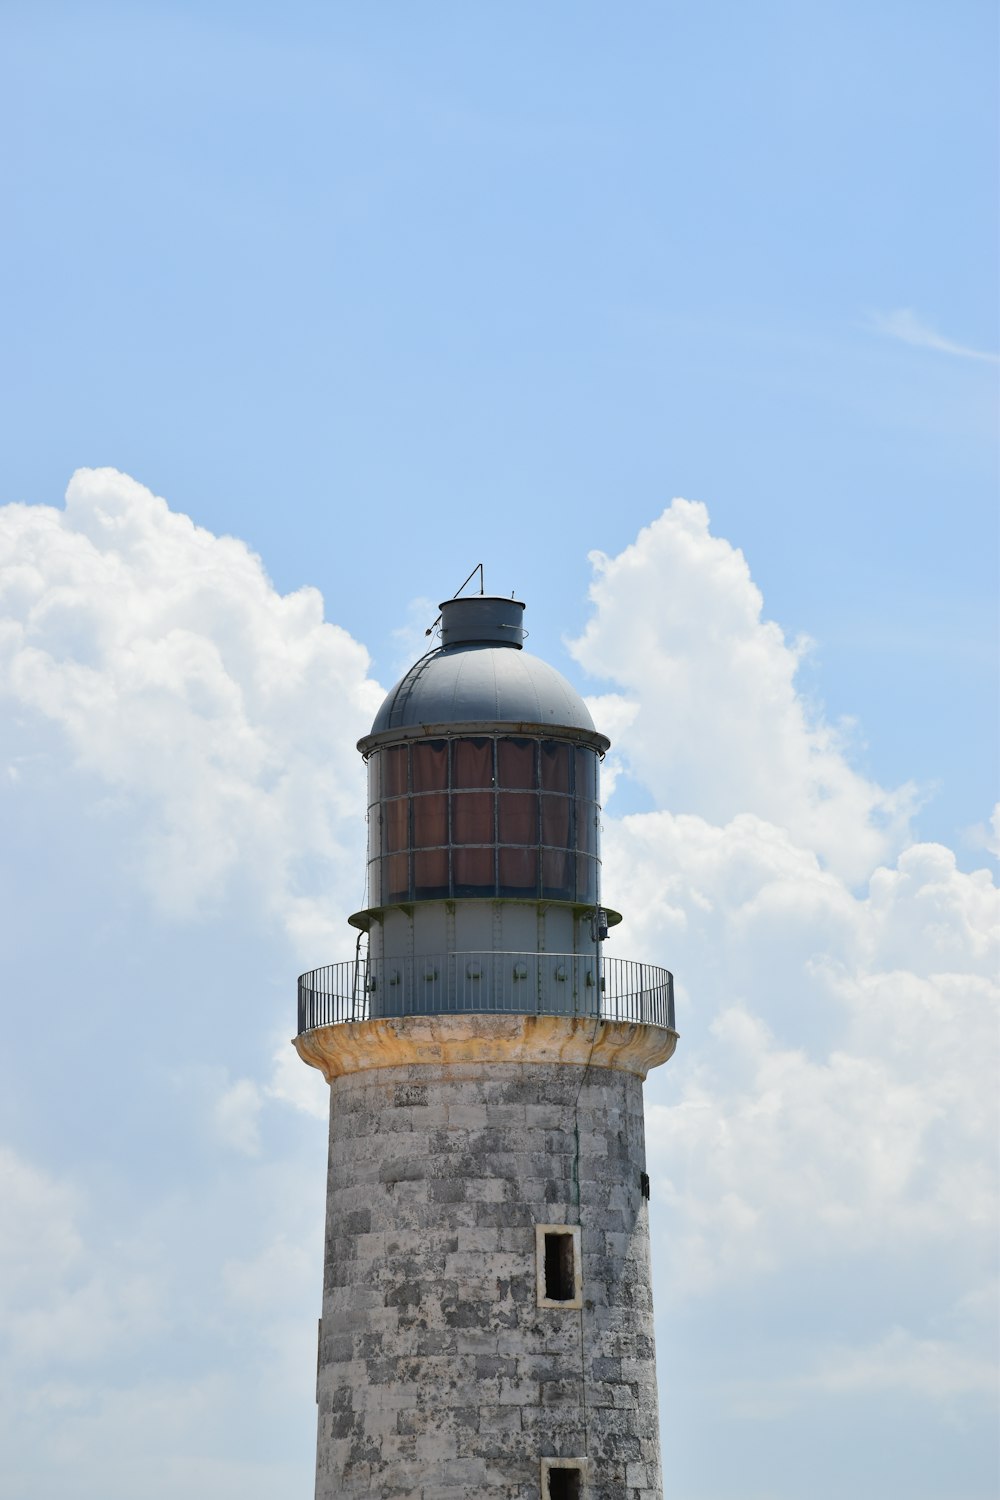 a large light house sitting on top of a hill